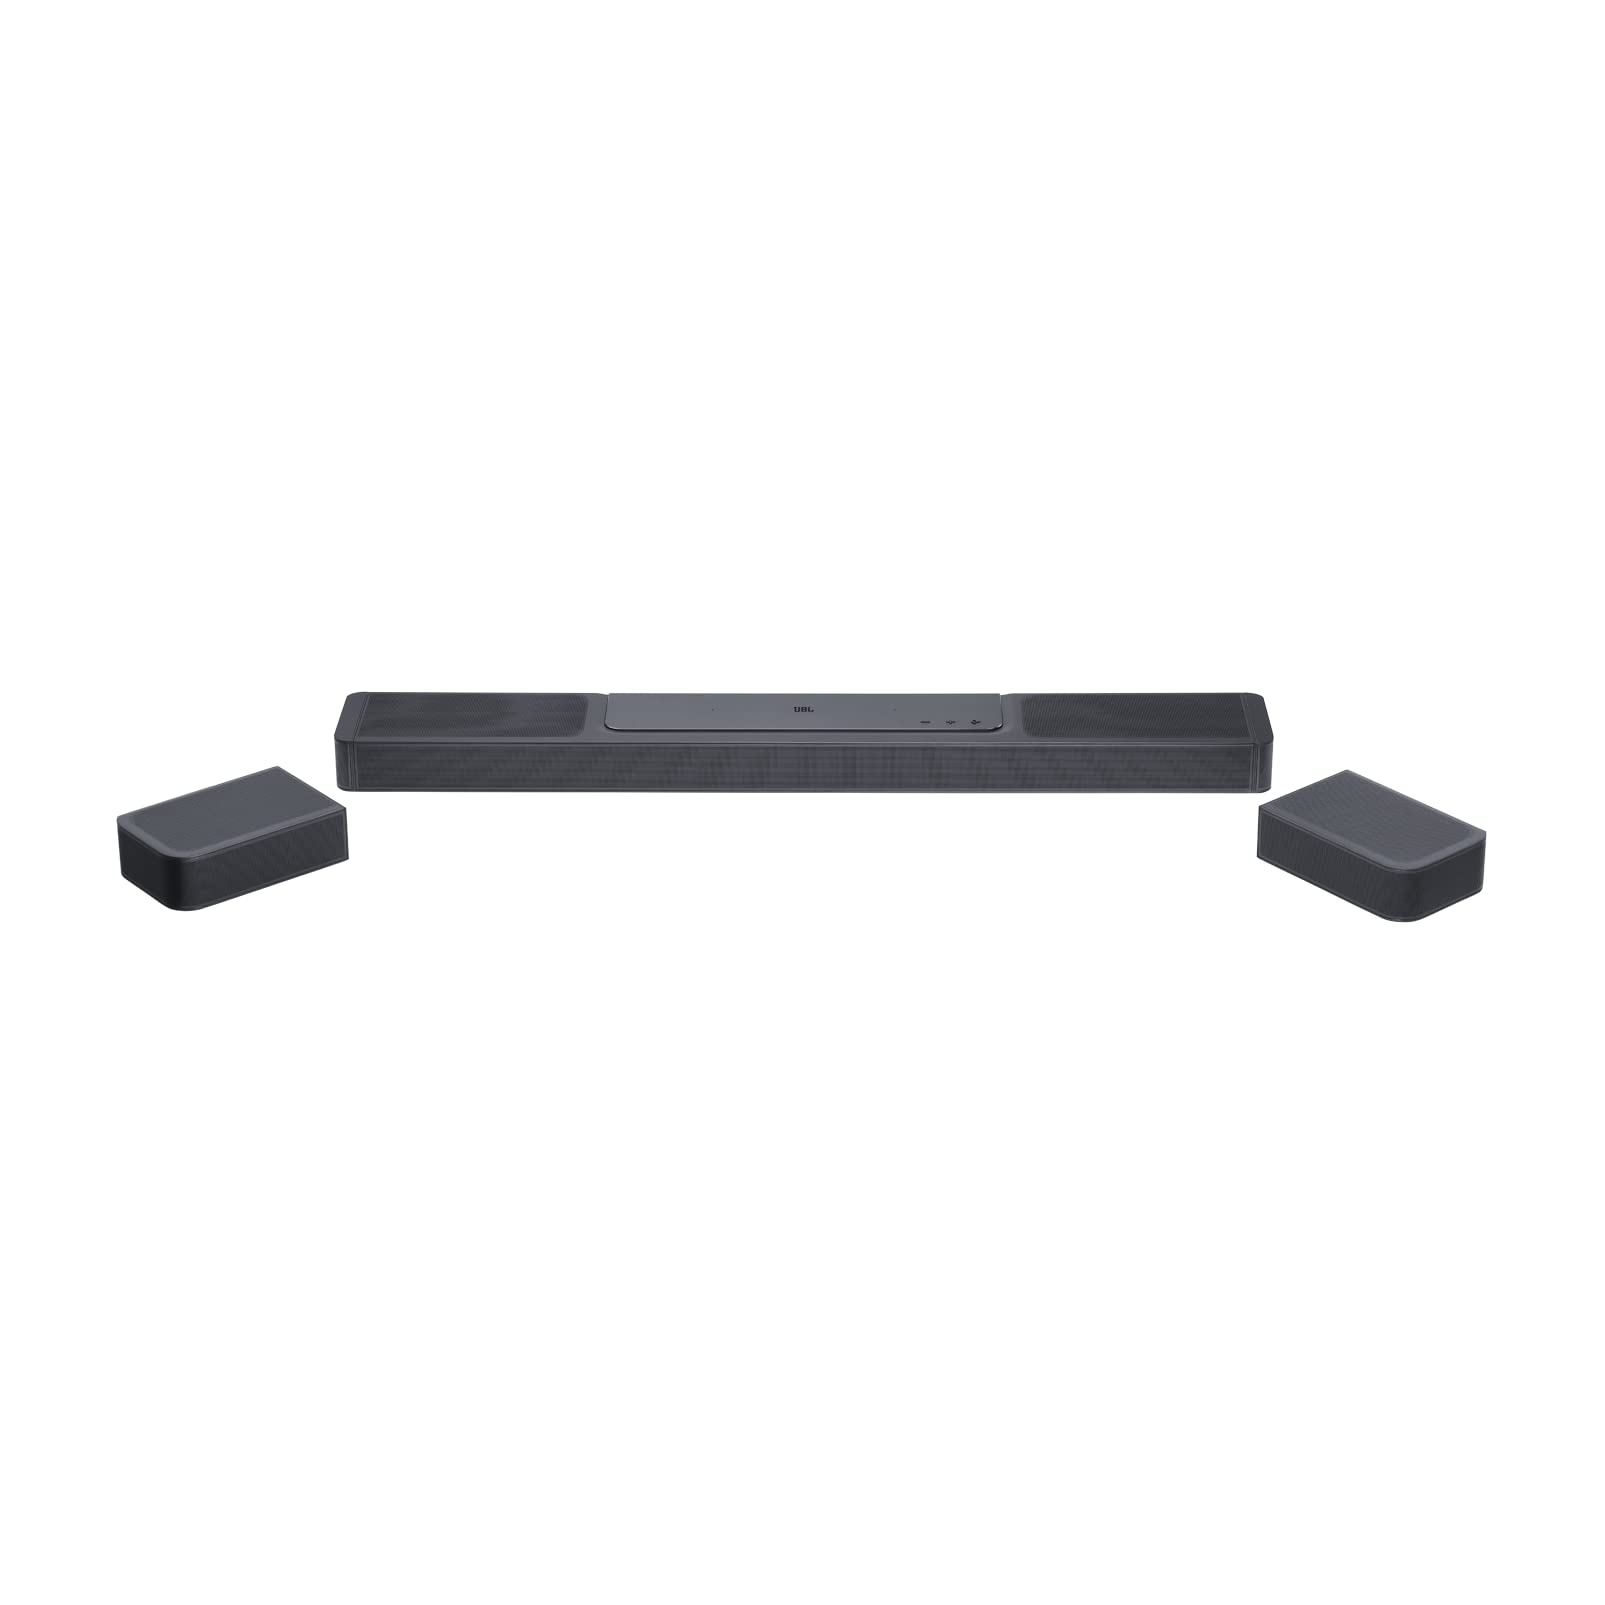 JBL Bar 1300X: 11.1.4-Channel soundbar with Detachable Surround Speakers, MultiBeam™, Dolby Atmos® and DTS:X®